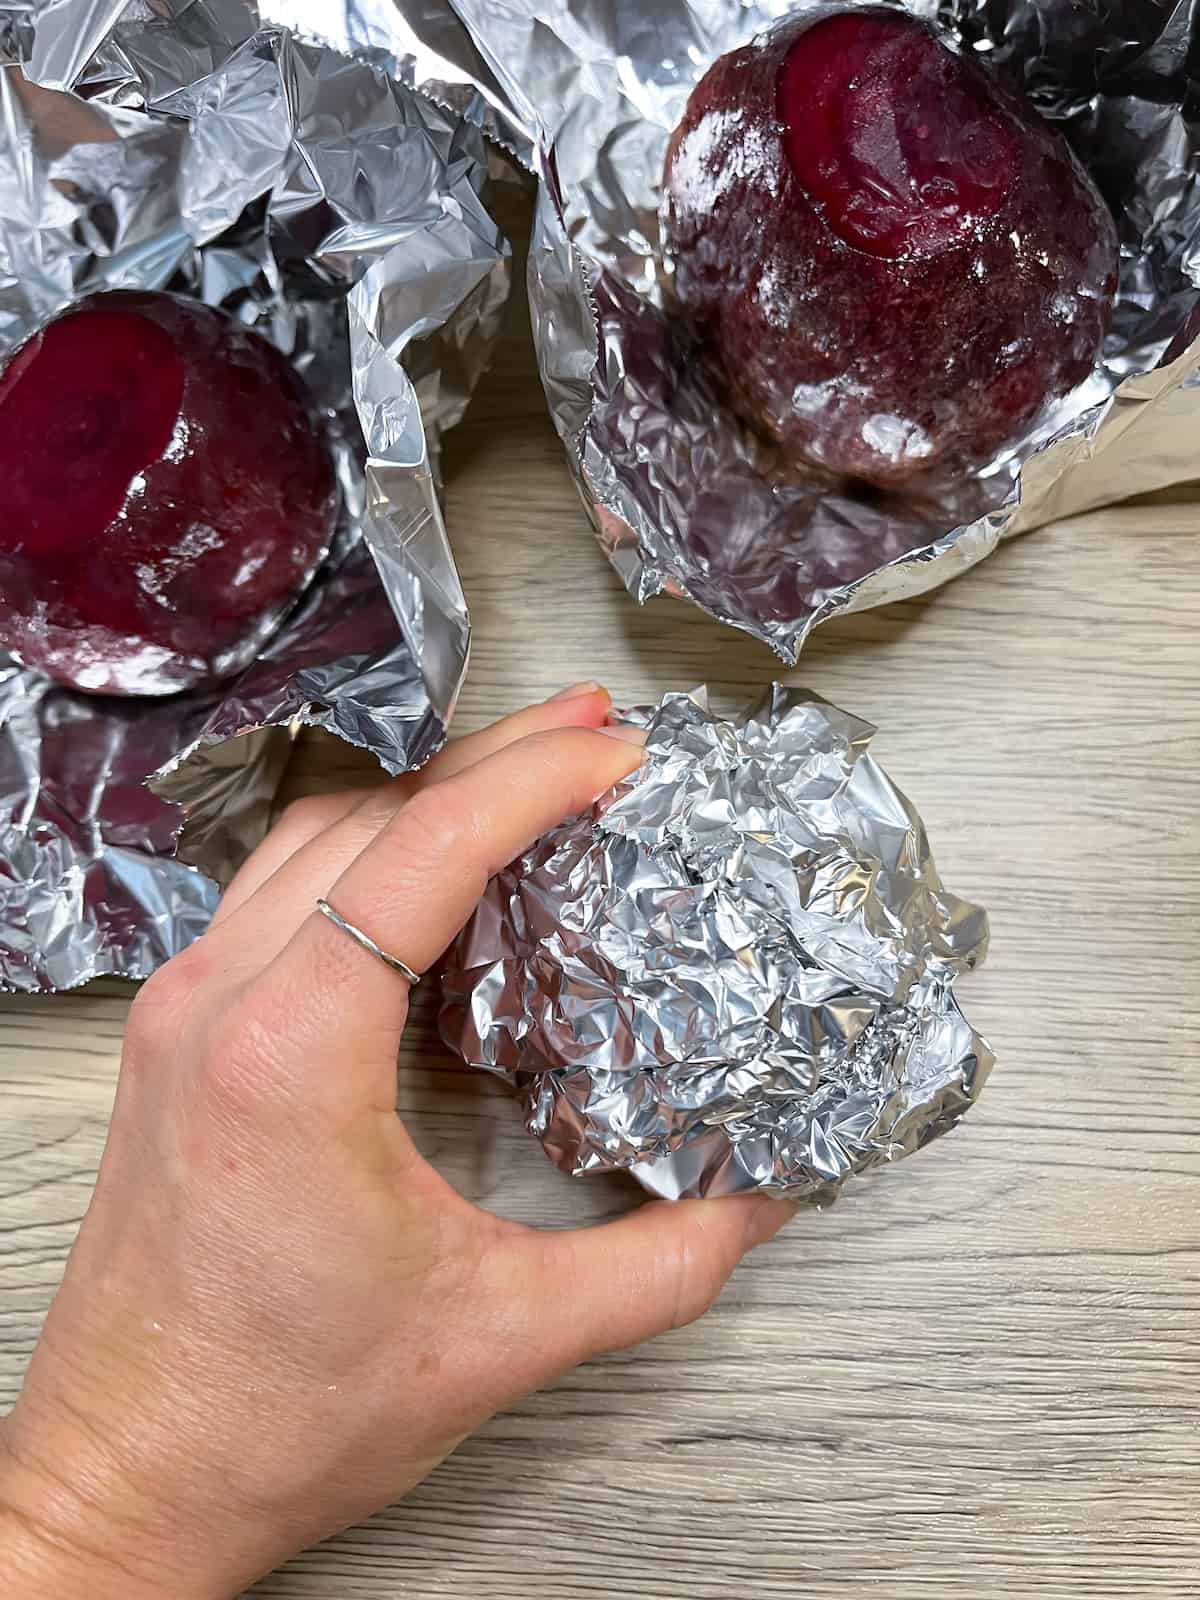 Red Beets wrapped in foil and coated in oil with a hand holding one of the beets